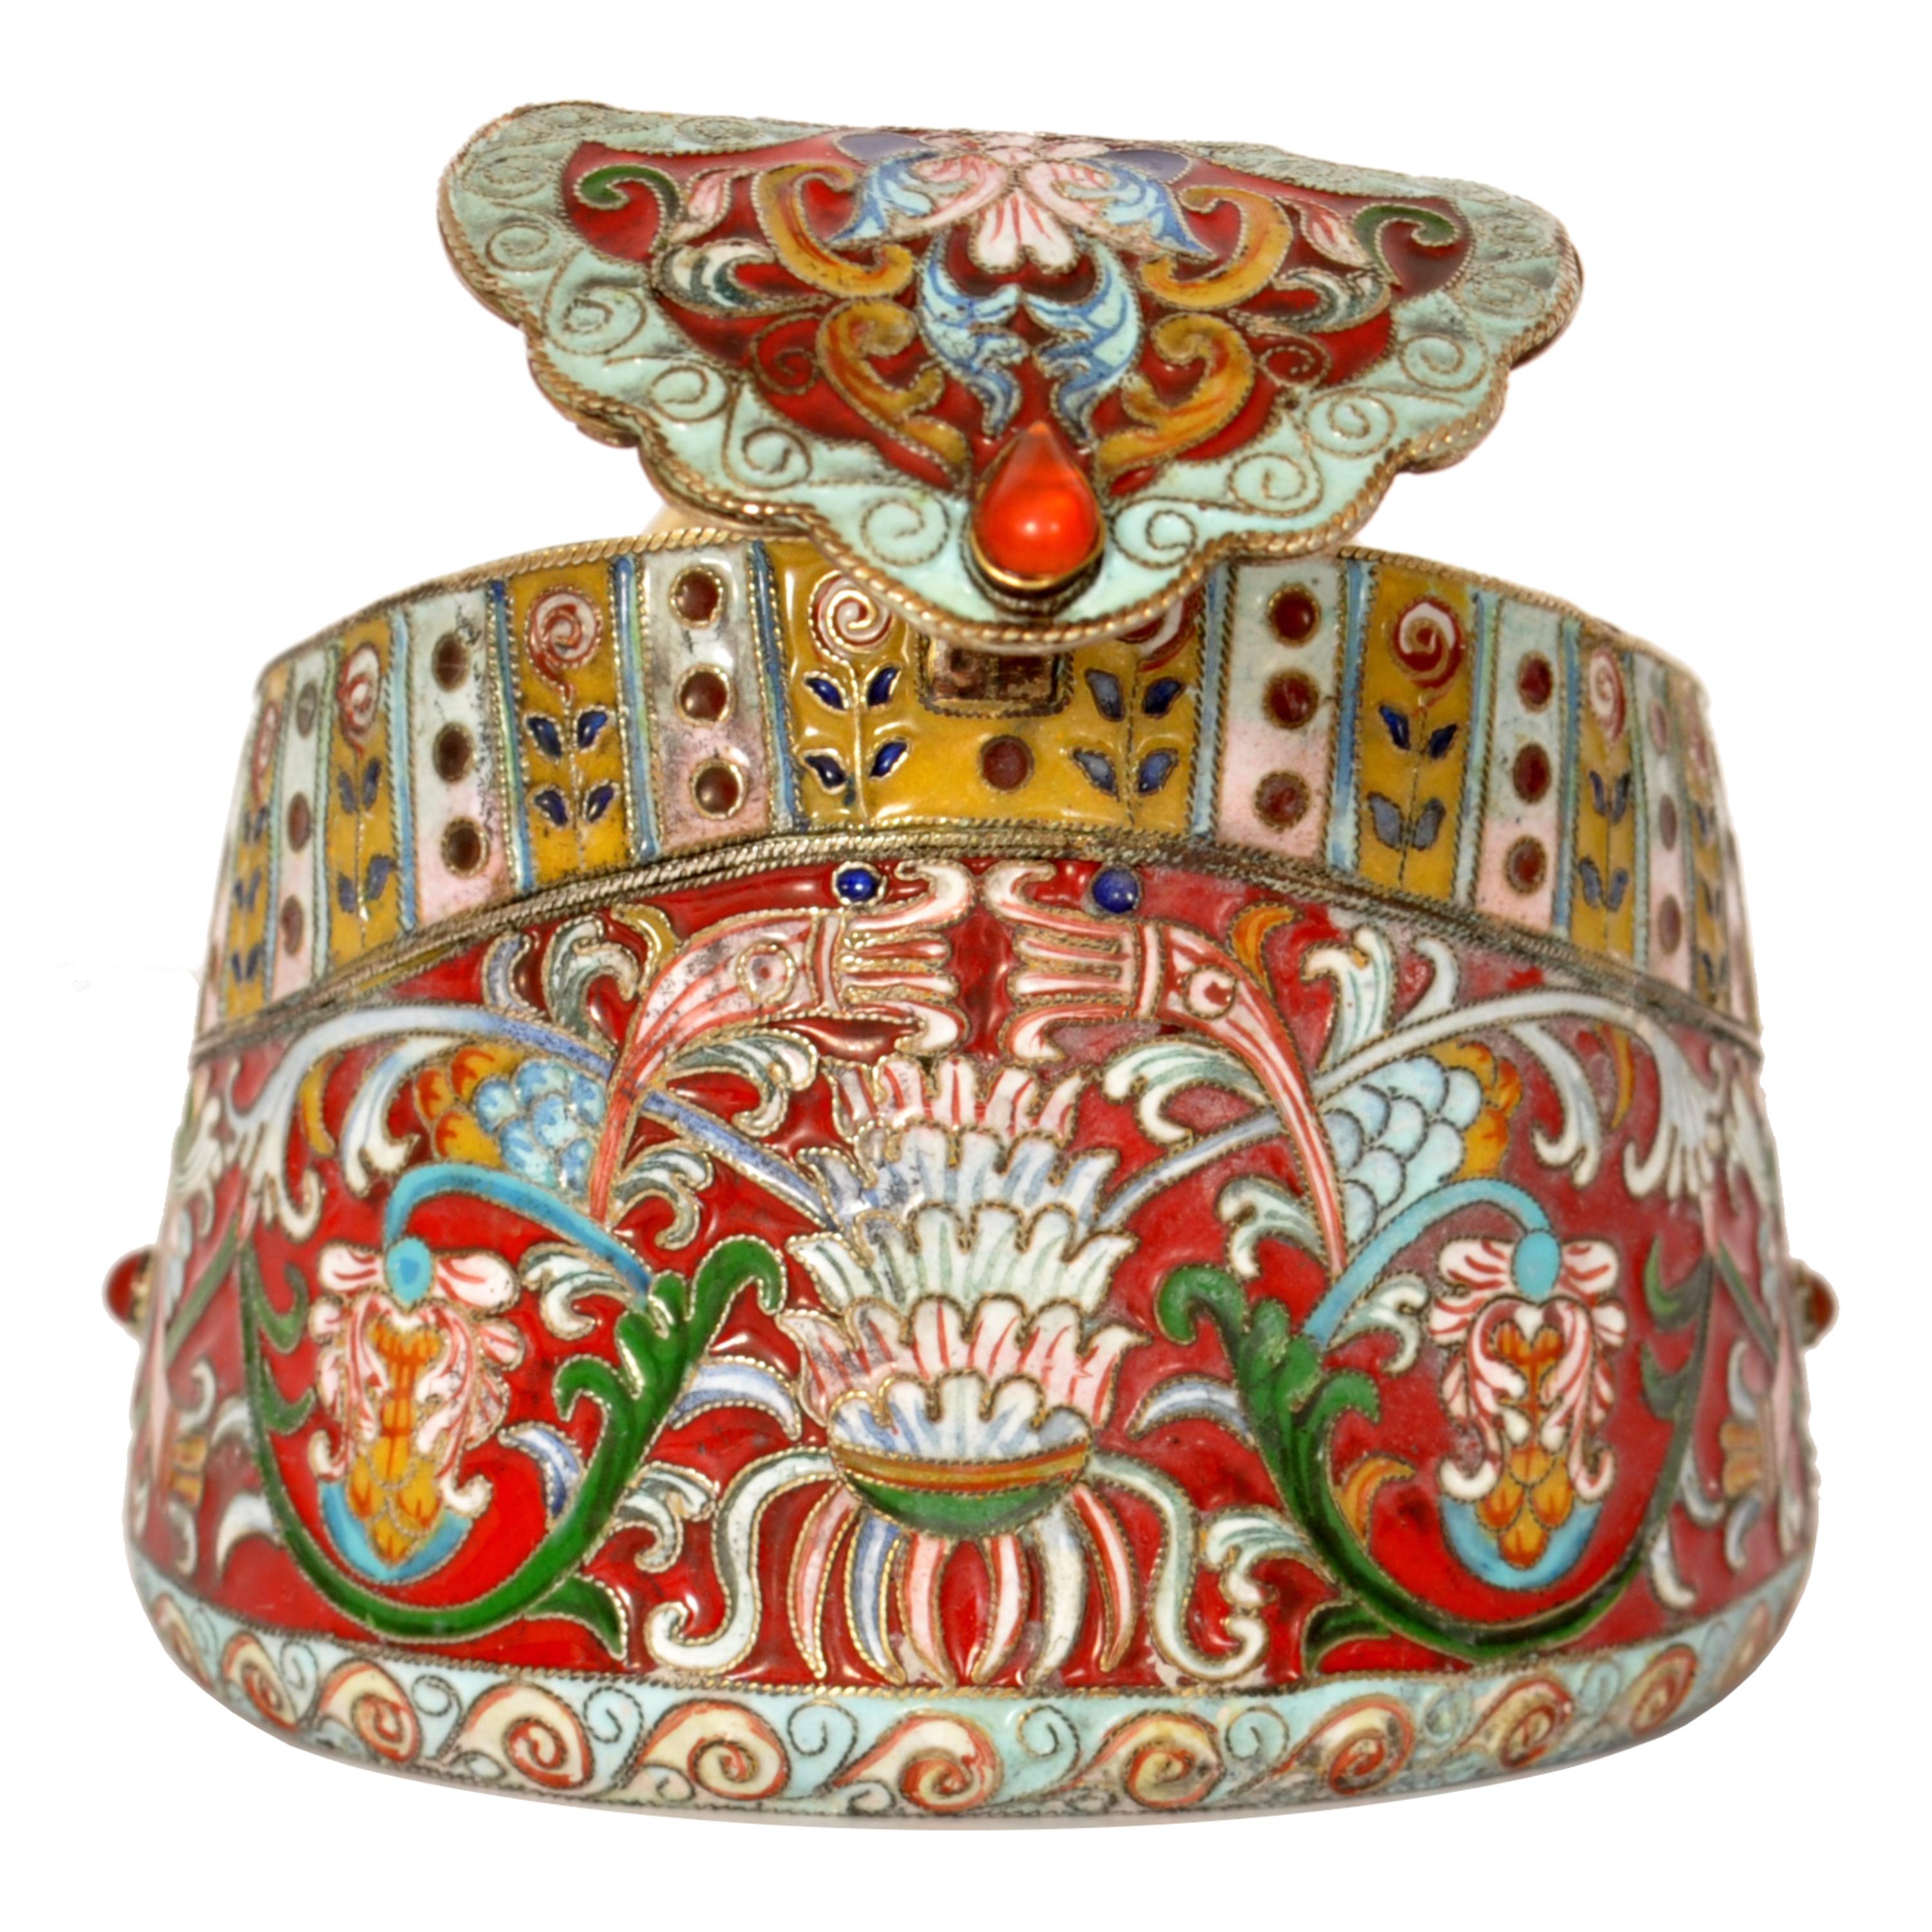 Early 20th Century Antique Imperial Russian Silver Gilt Cloisonne Enamel Jeweled Fabergé Kovsh 1908 For Sale